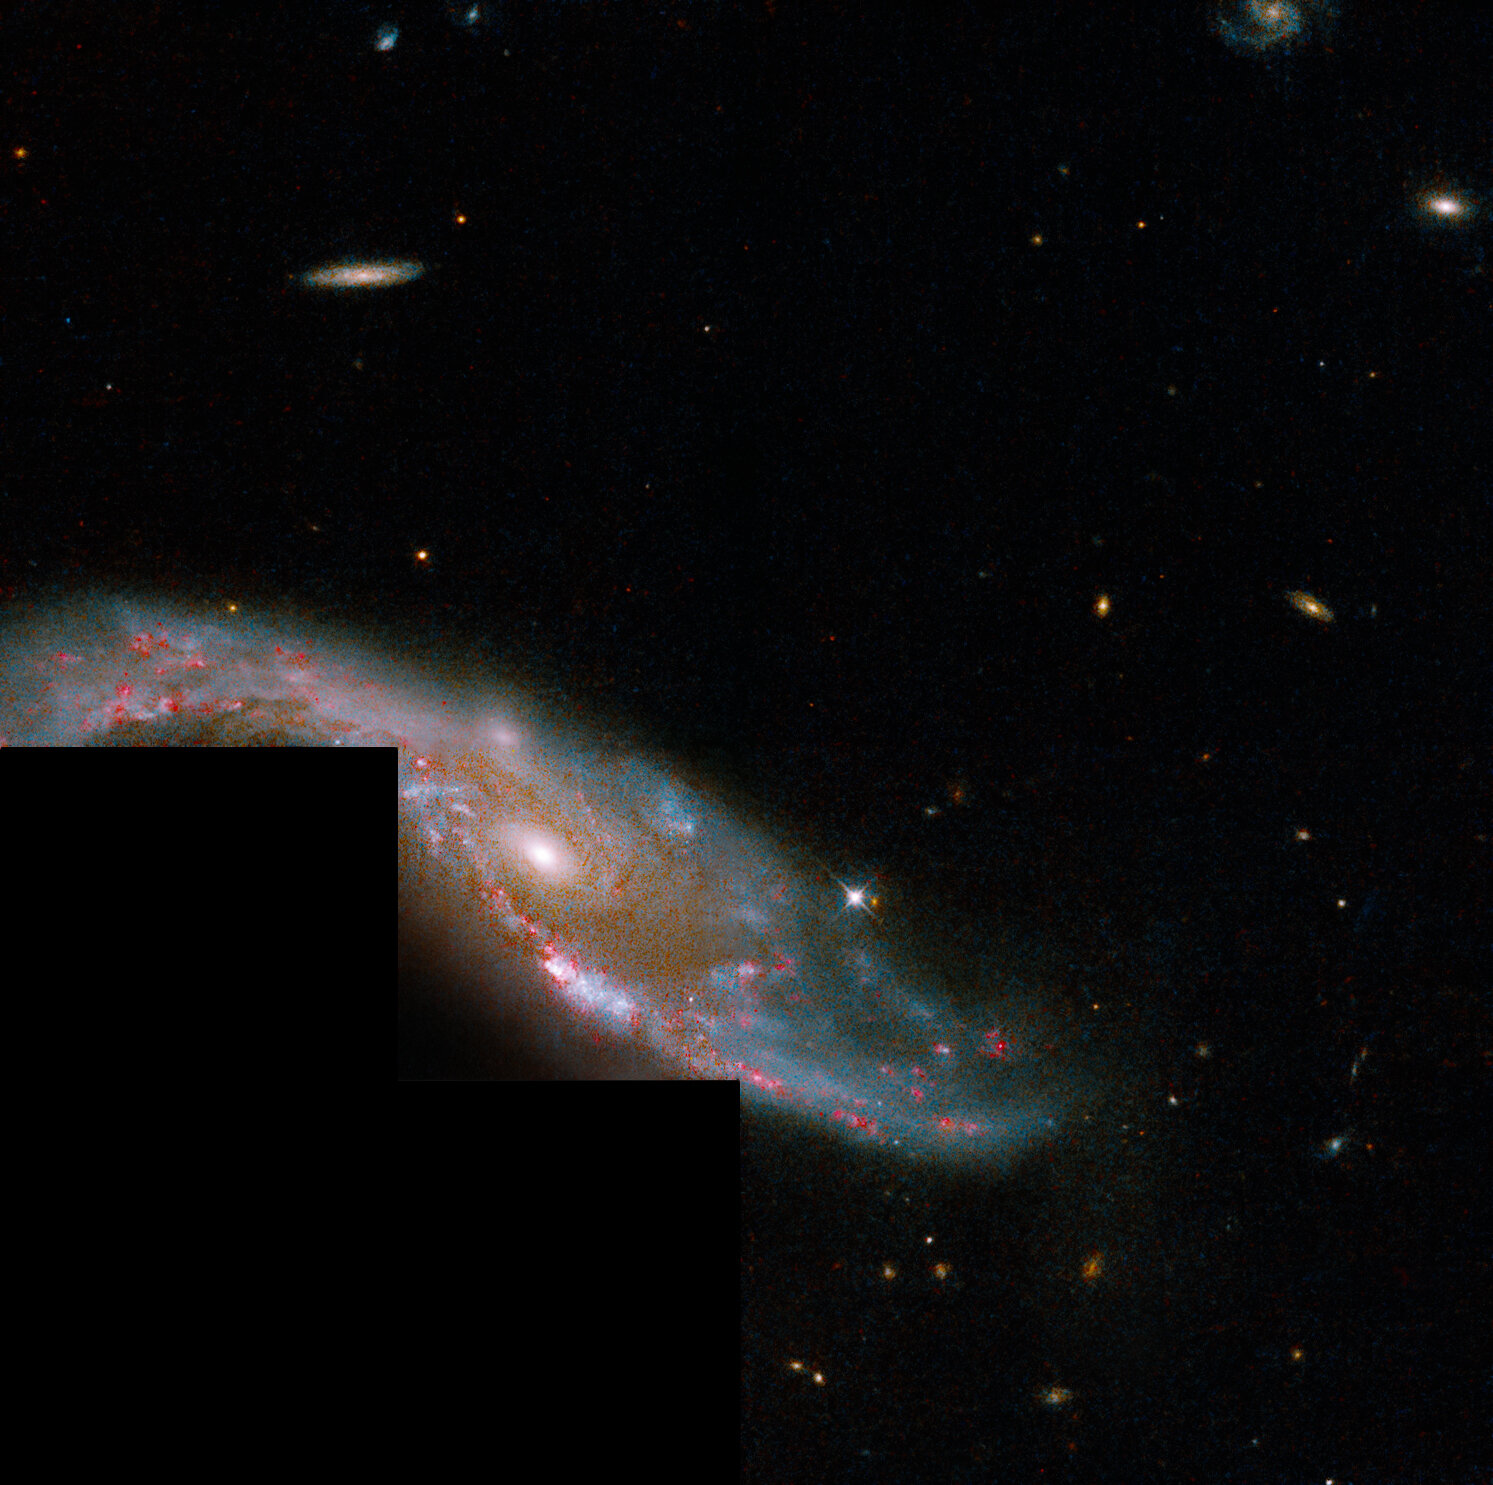 The spiral galaxy is observed by the Hubble telescope in a state of interaction.